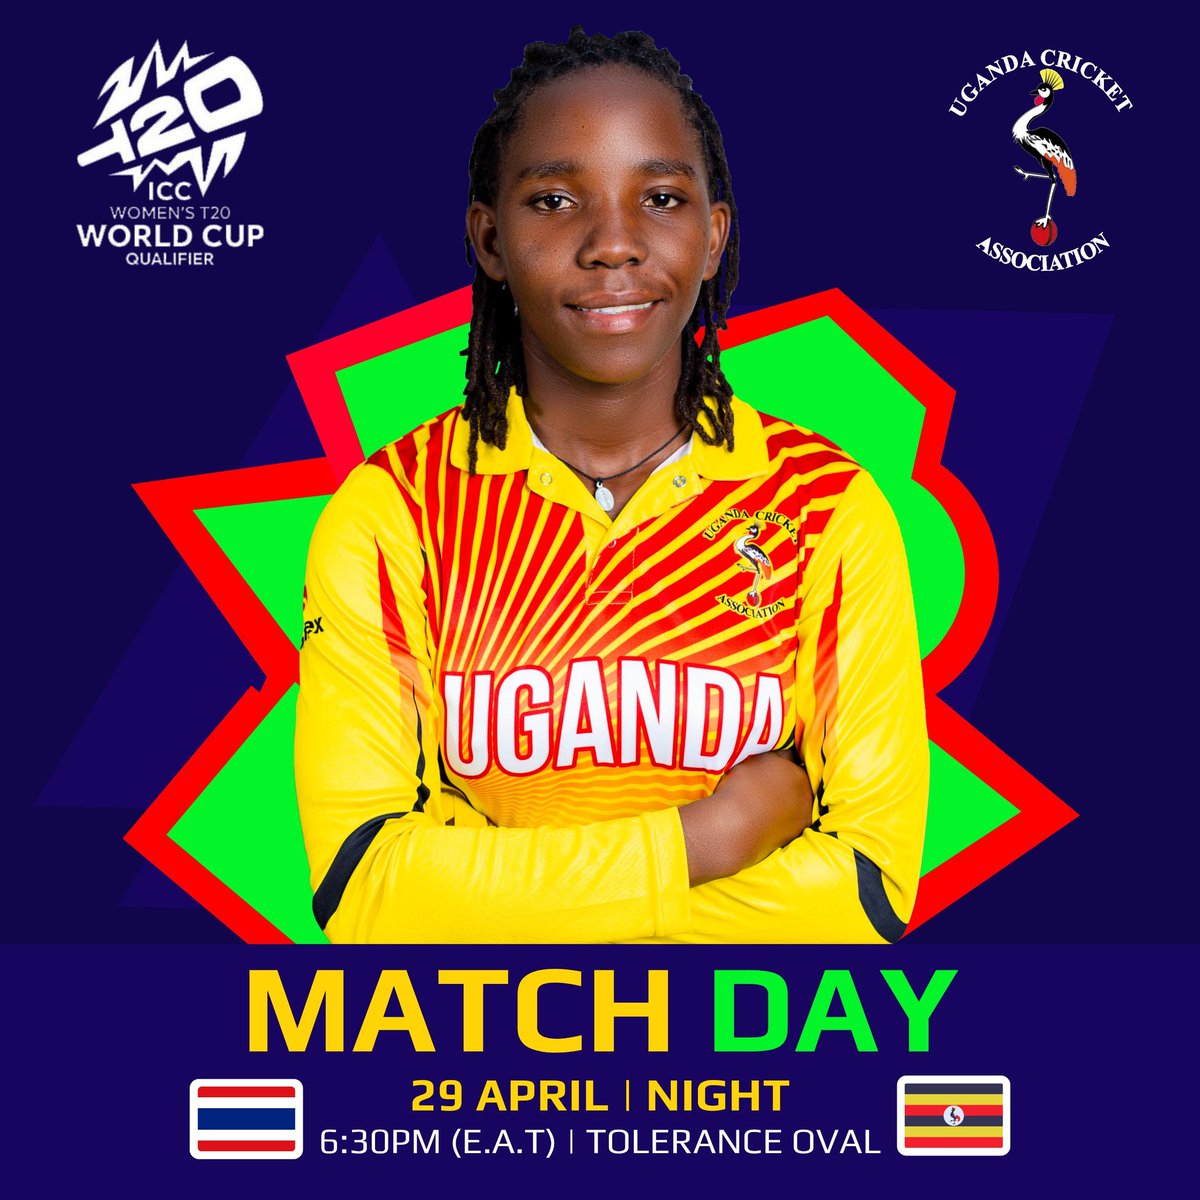 ICC T20 Women's Global Qualifiers

Game 3: Uganda 🇺🇬 vs. Thailand 🇹🇭 

Victoria Pearls must secure this win for better qualification odds.

Watch live on icc.tv

The fans are rooting for you, girls! 🏏🇺🇬

🇺🇬 🇺🇬 🇺🇬 🇺🇬 
 #LetsGoVictoriaPearls 🏏🇺🇬